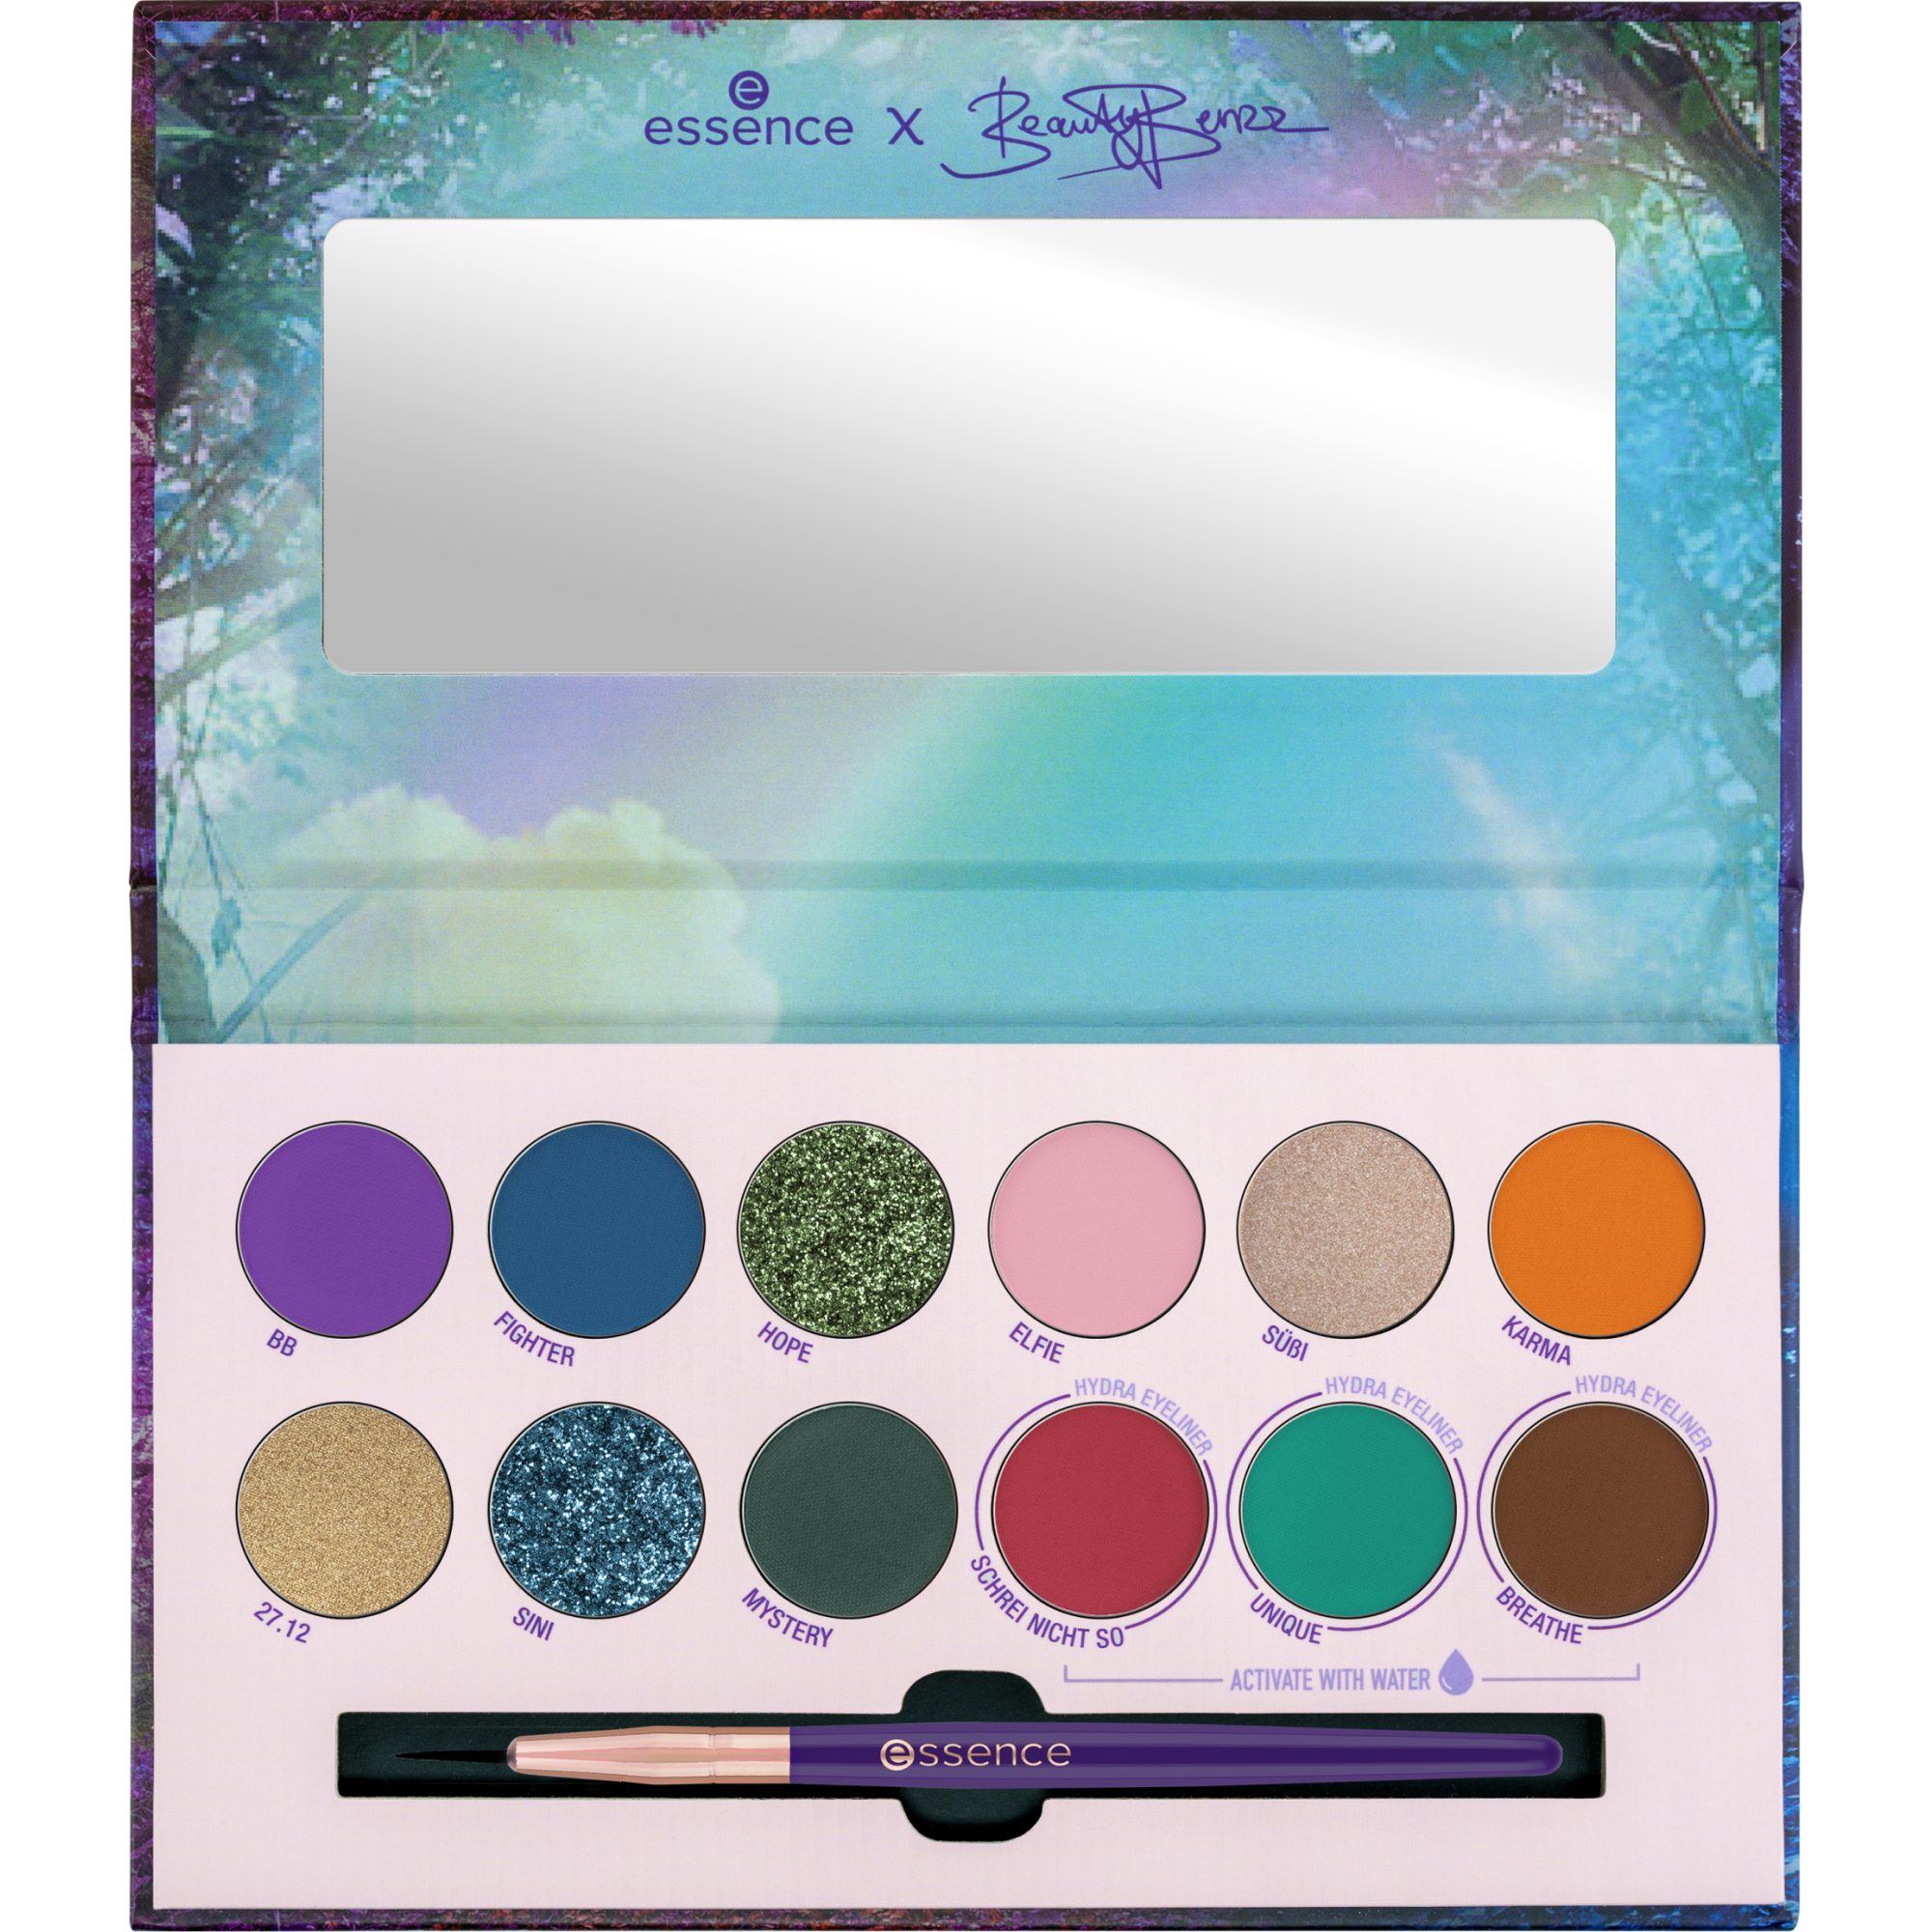 x Beauty Benzz everyday is a MYSTERY eyeshadow & eyeliner palette